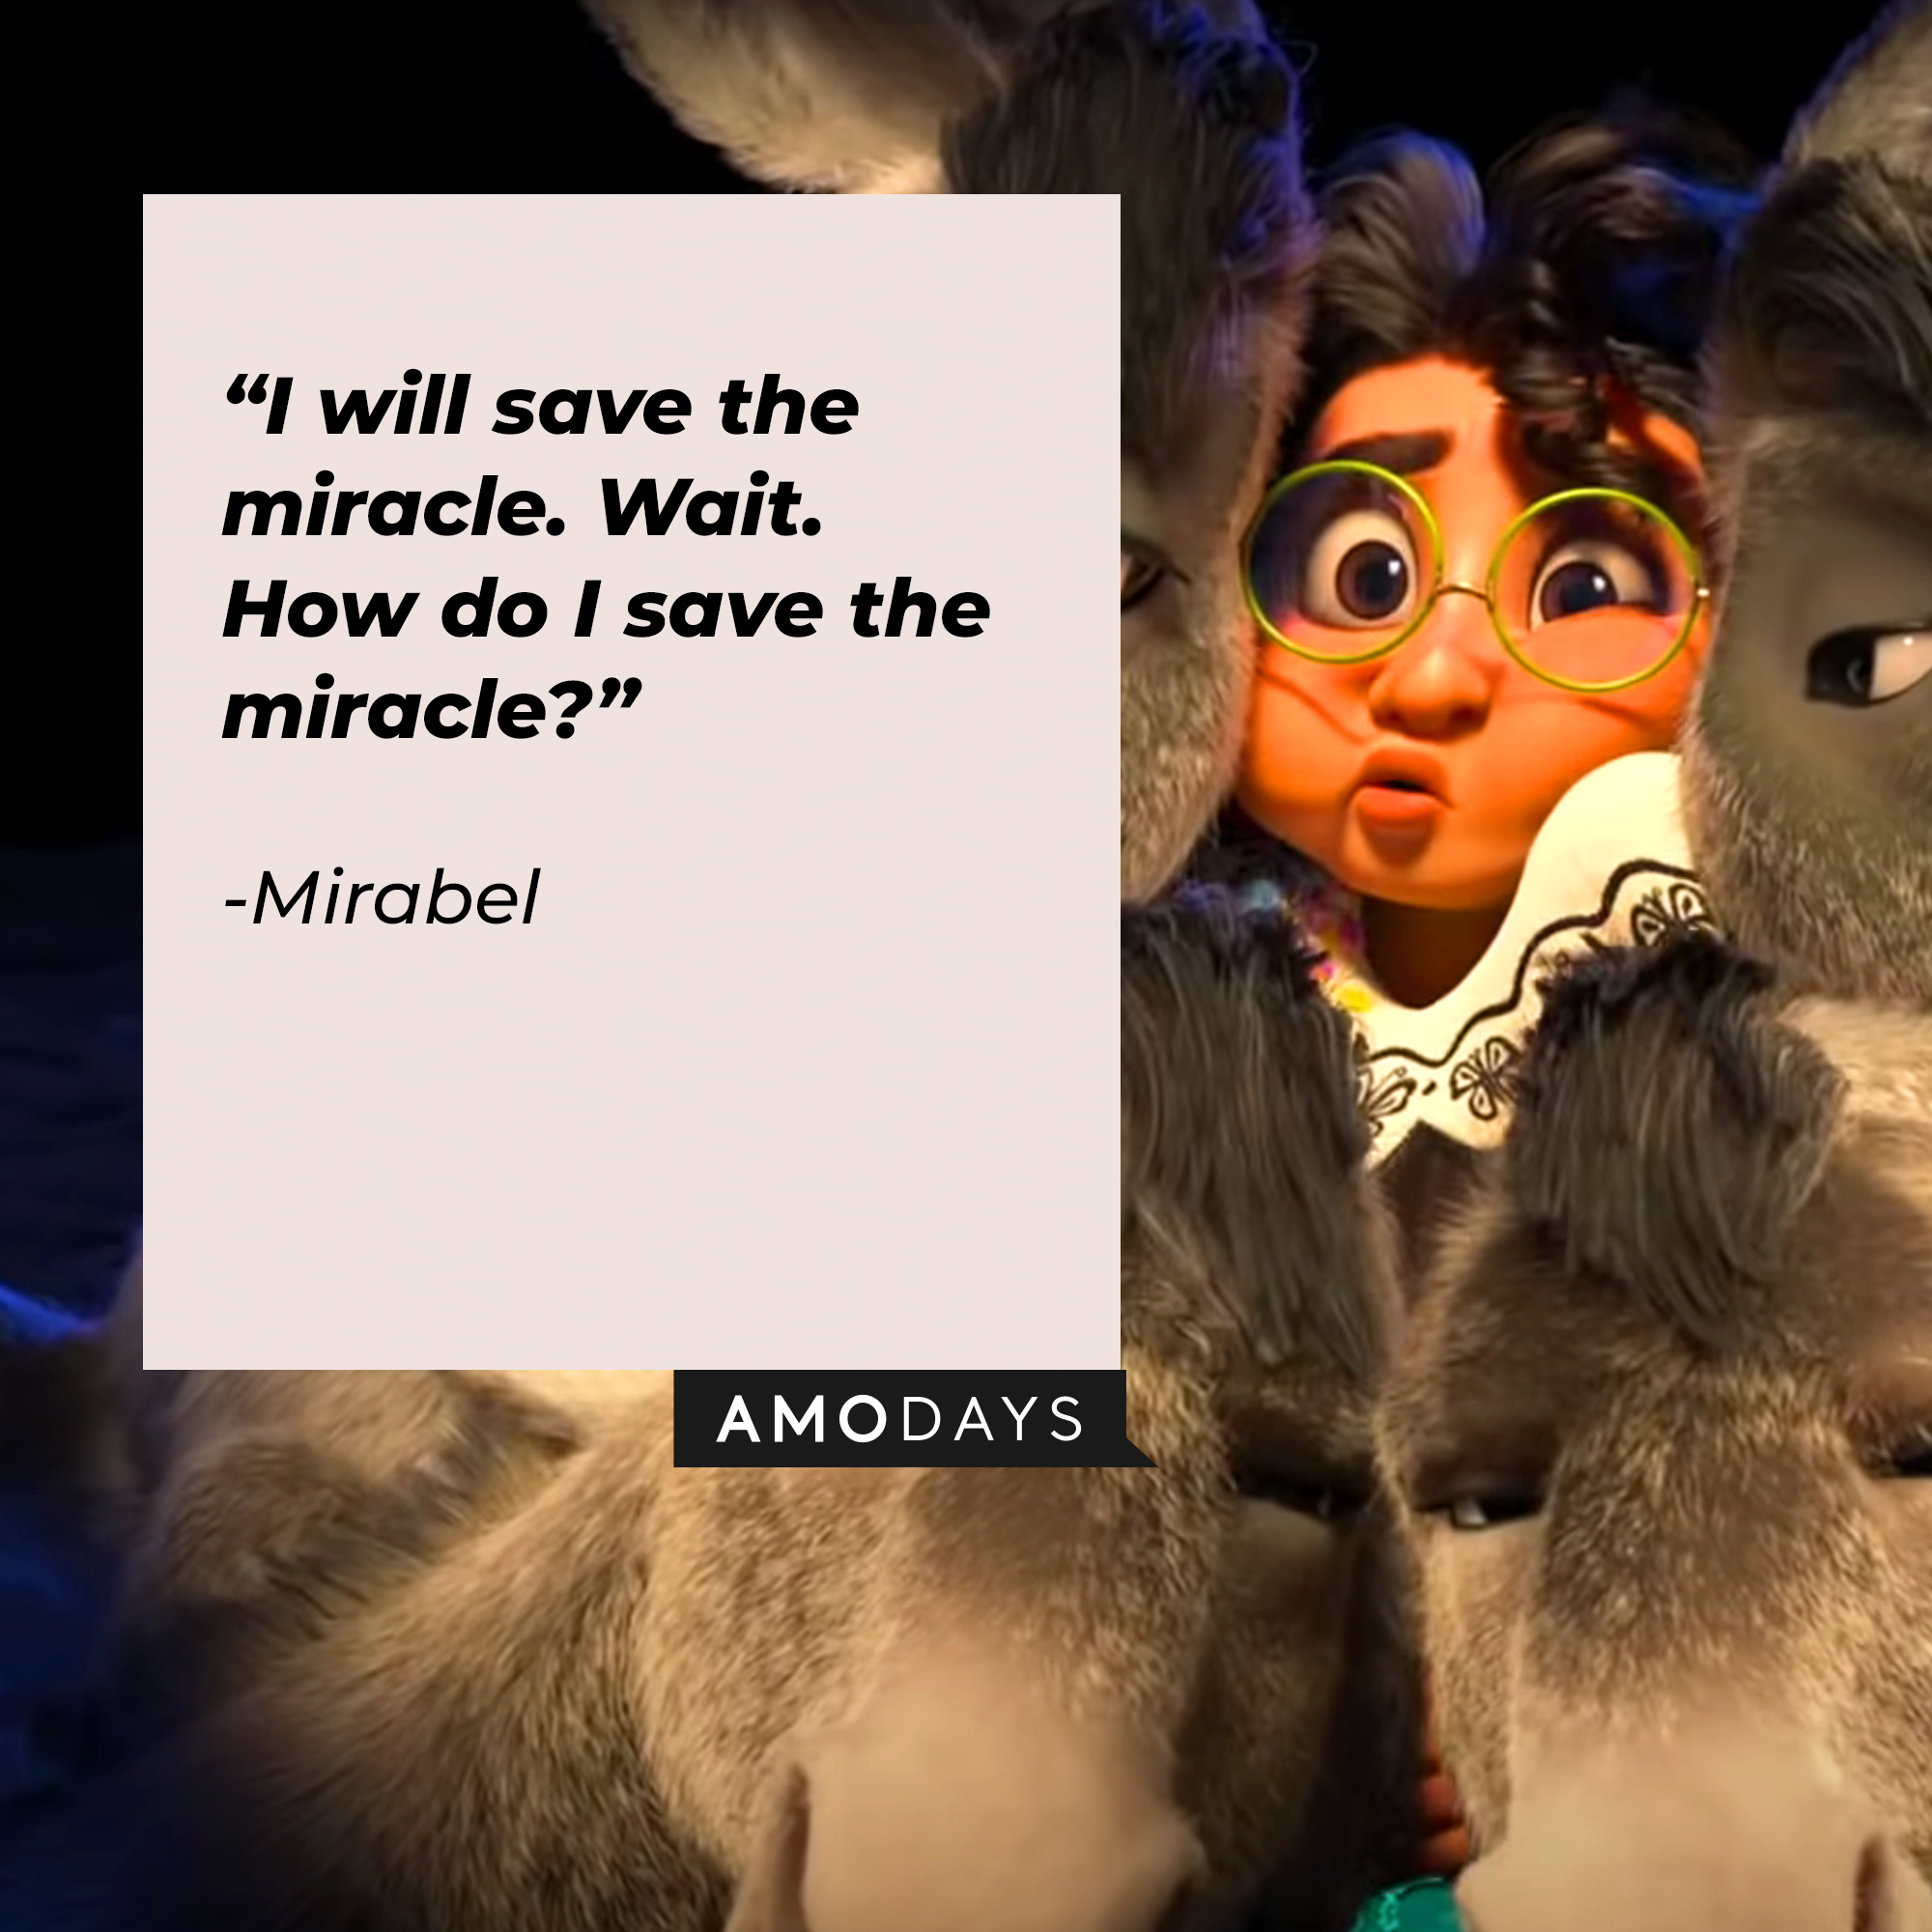 An image of Mirabel, with her quote: “I will save the miracle. Wait. How do I save the miracle?" | Source: Youtube.com/DisneyMusicVEVO